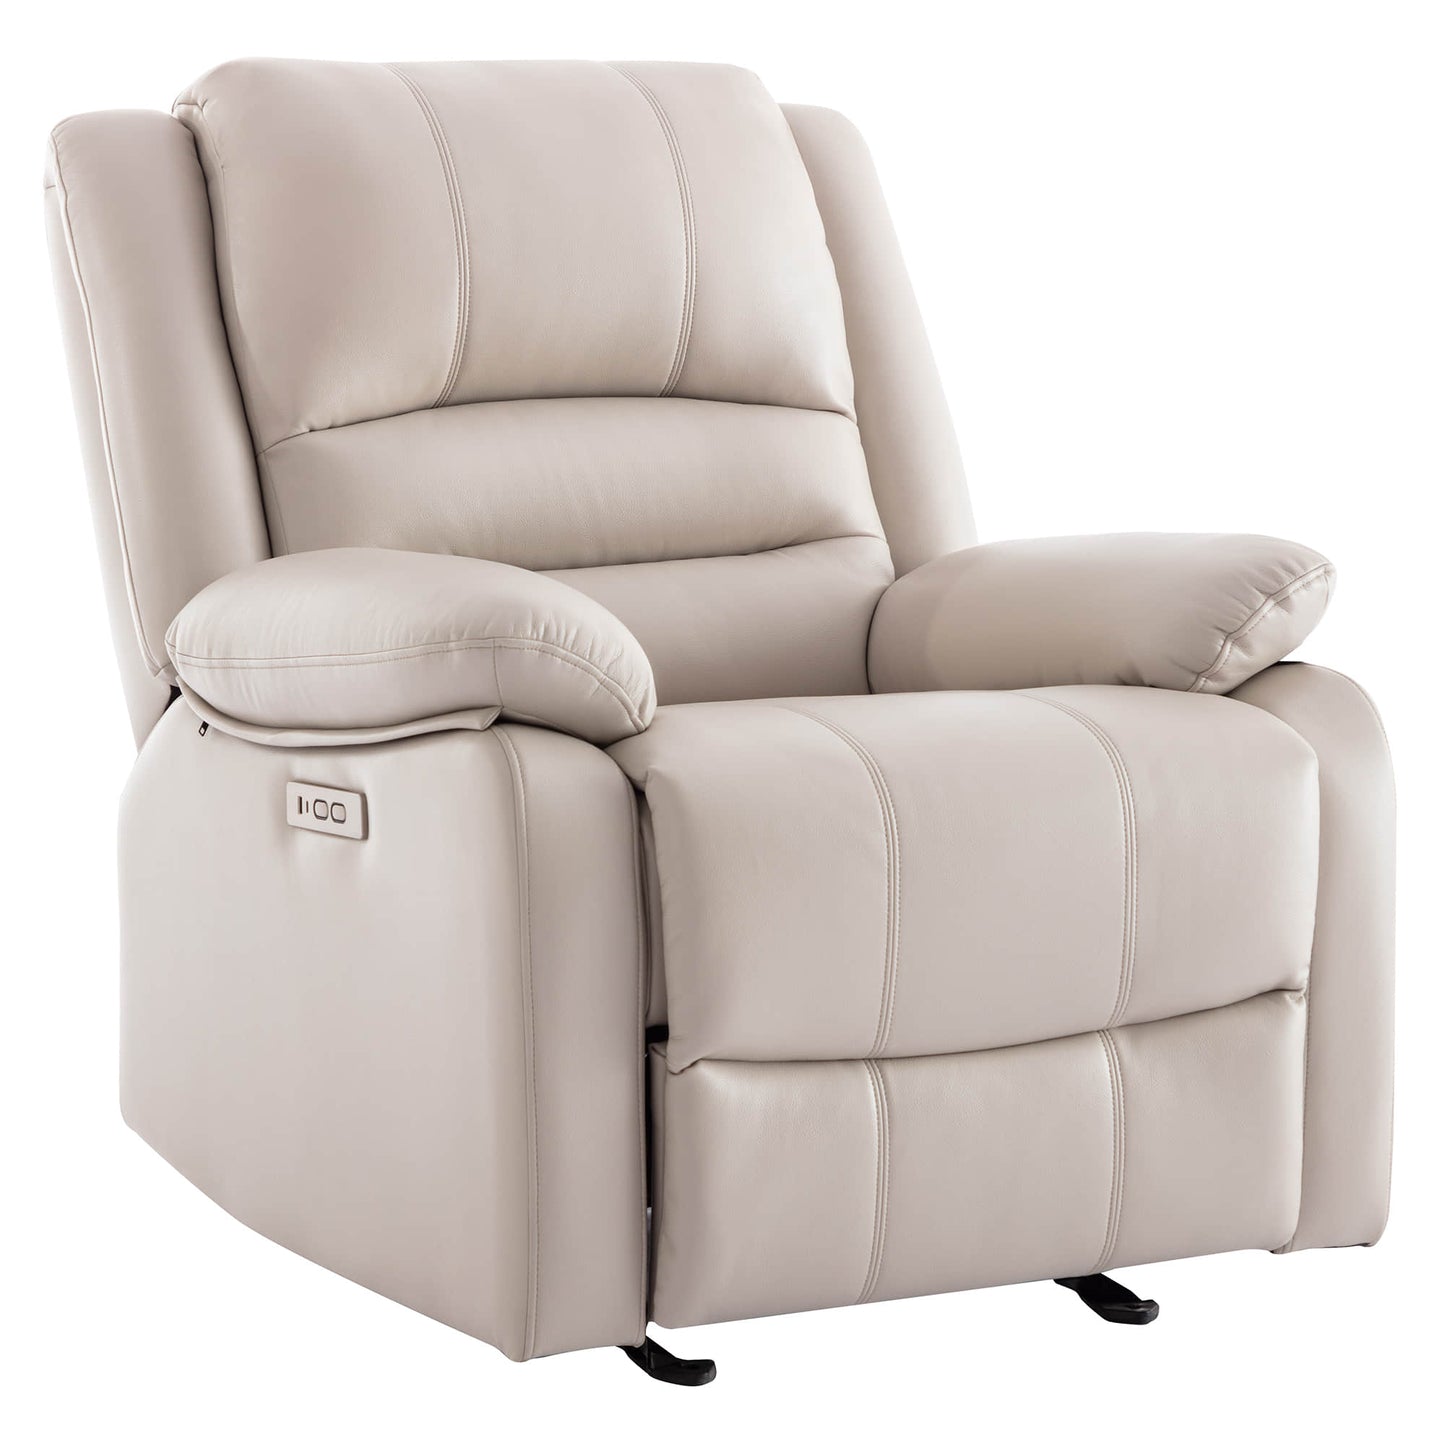 CHITA LIVING-Luckie Power Glider Recliner with Lumbar Support-Recliners-Faux Leather-Black-